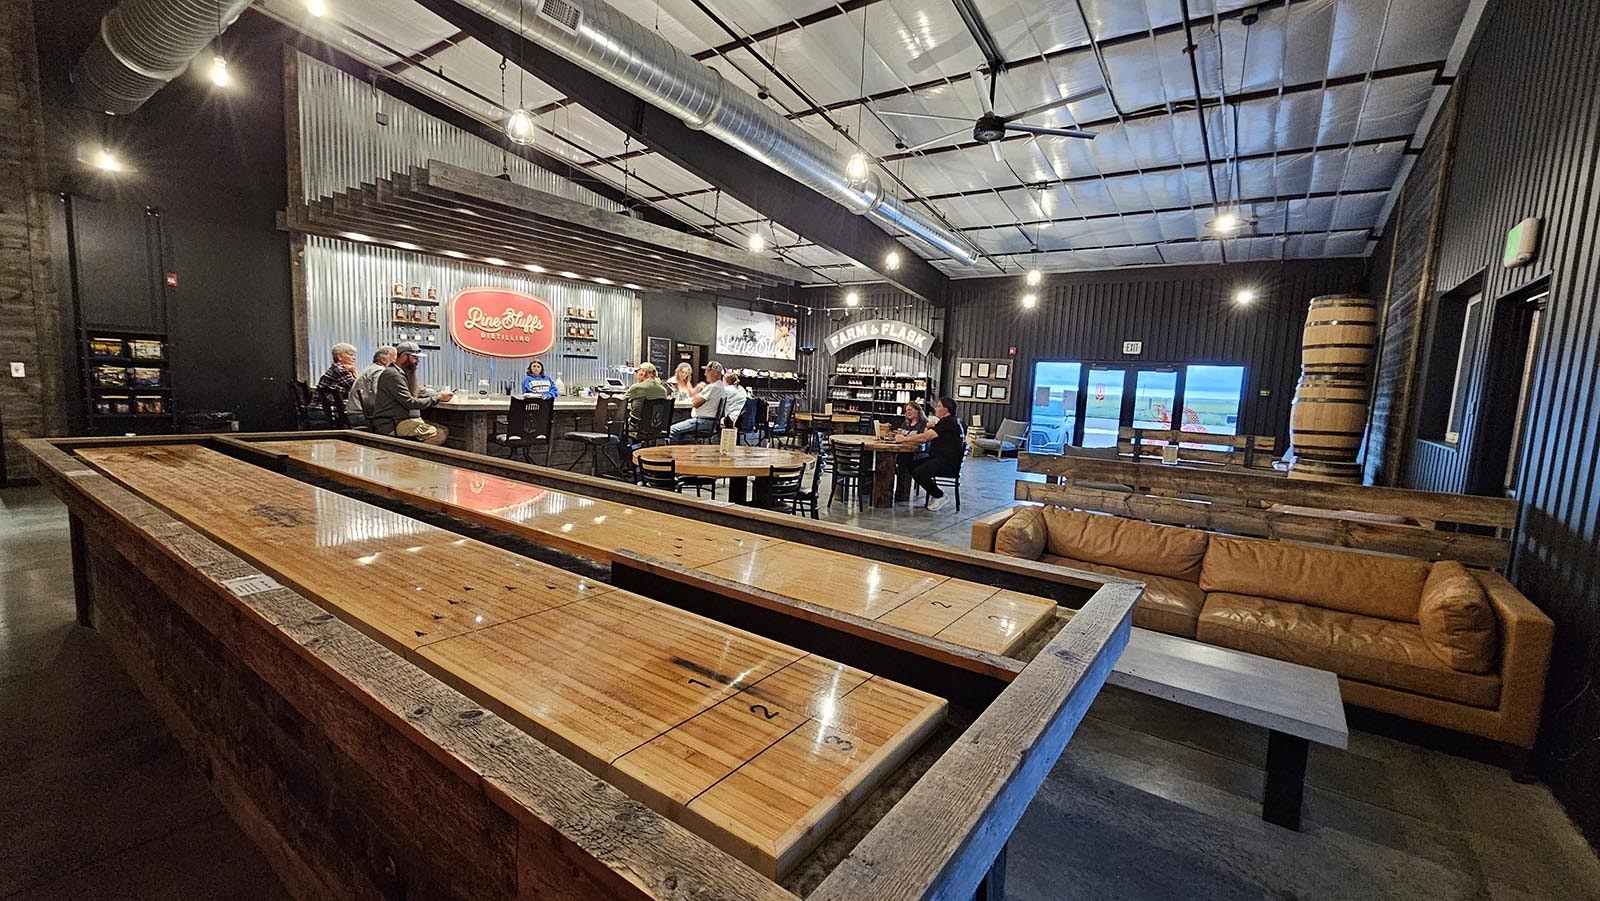 Pine Bluffs Distilling's tasting room is huge, with large, comfortable sofas, a shuffleboard game and a bar area.